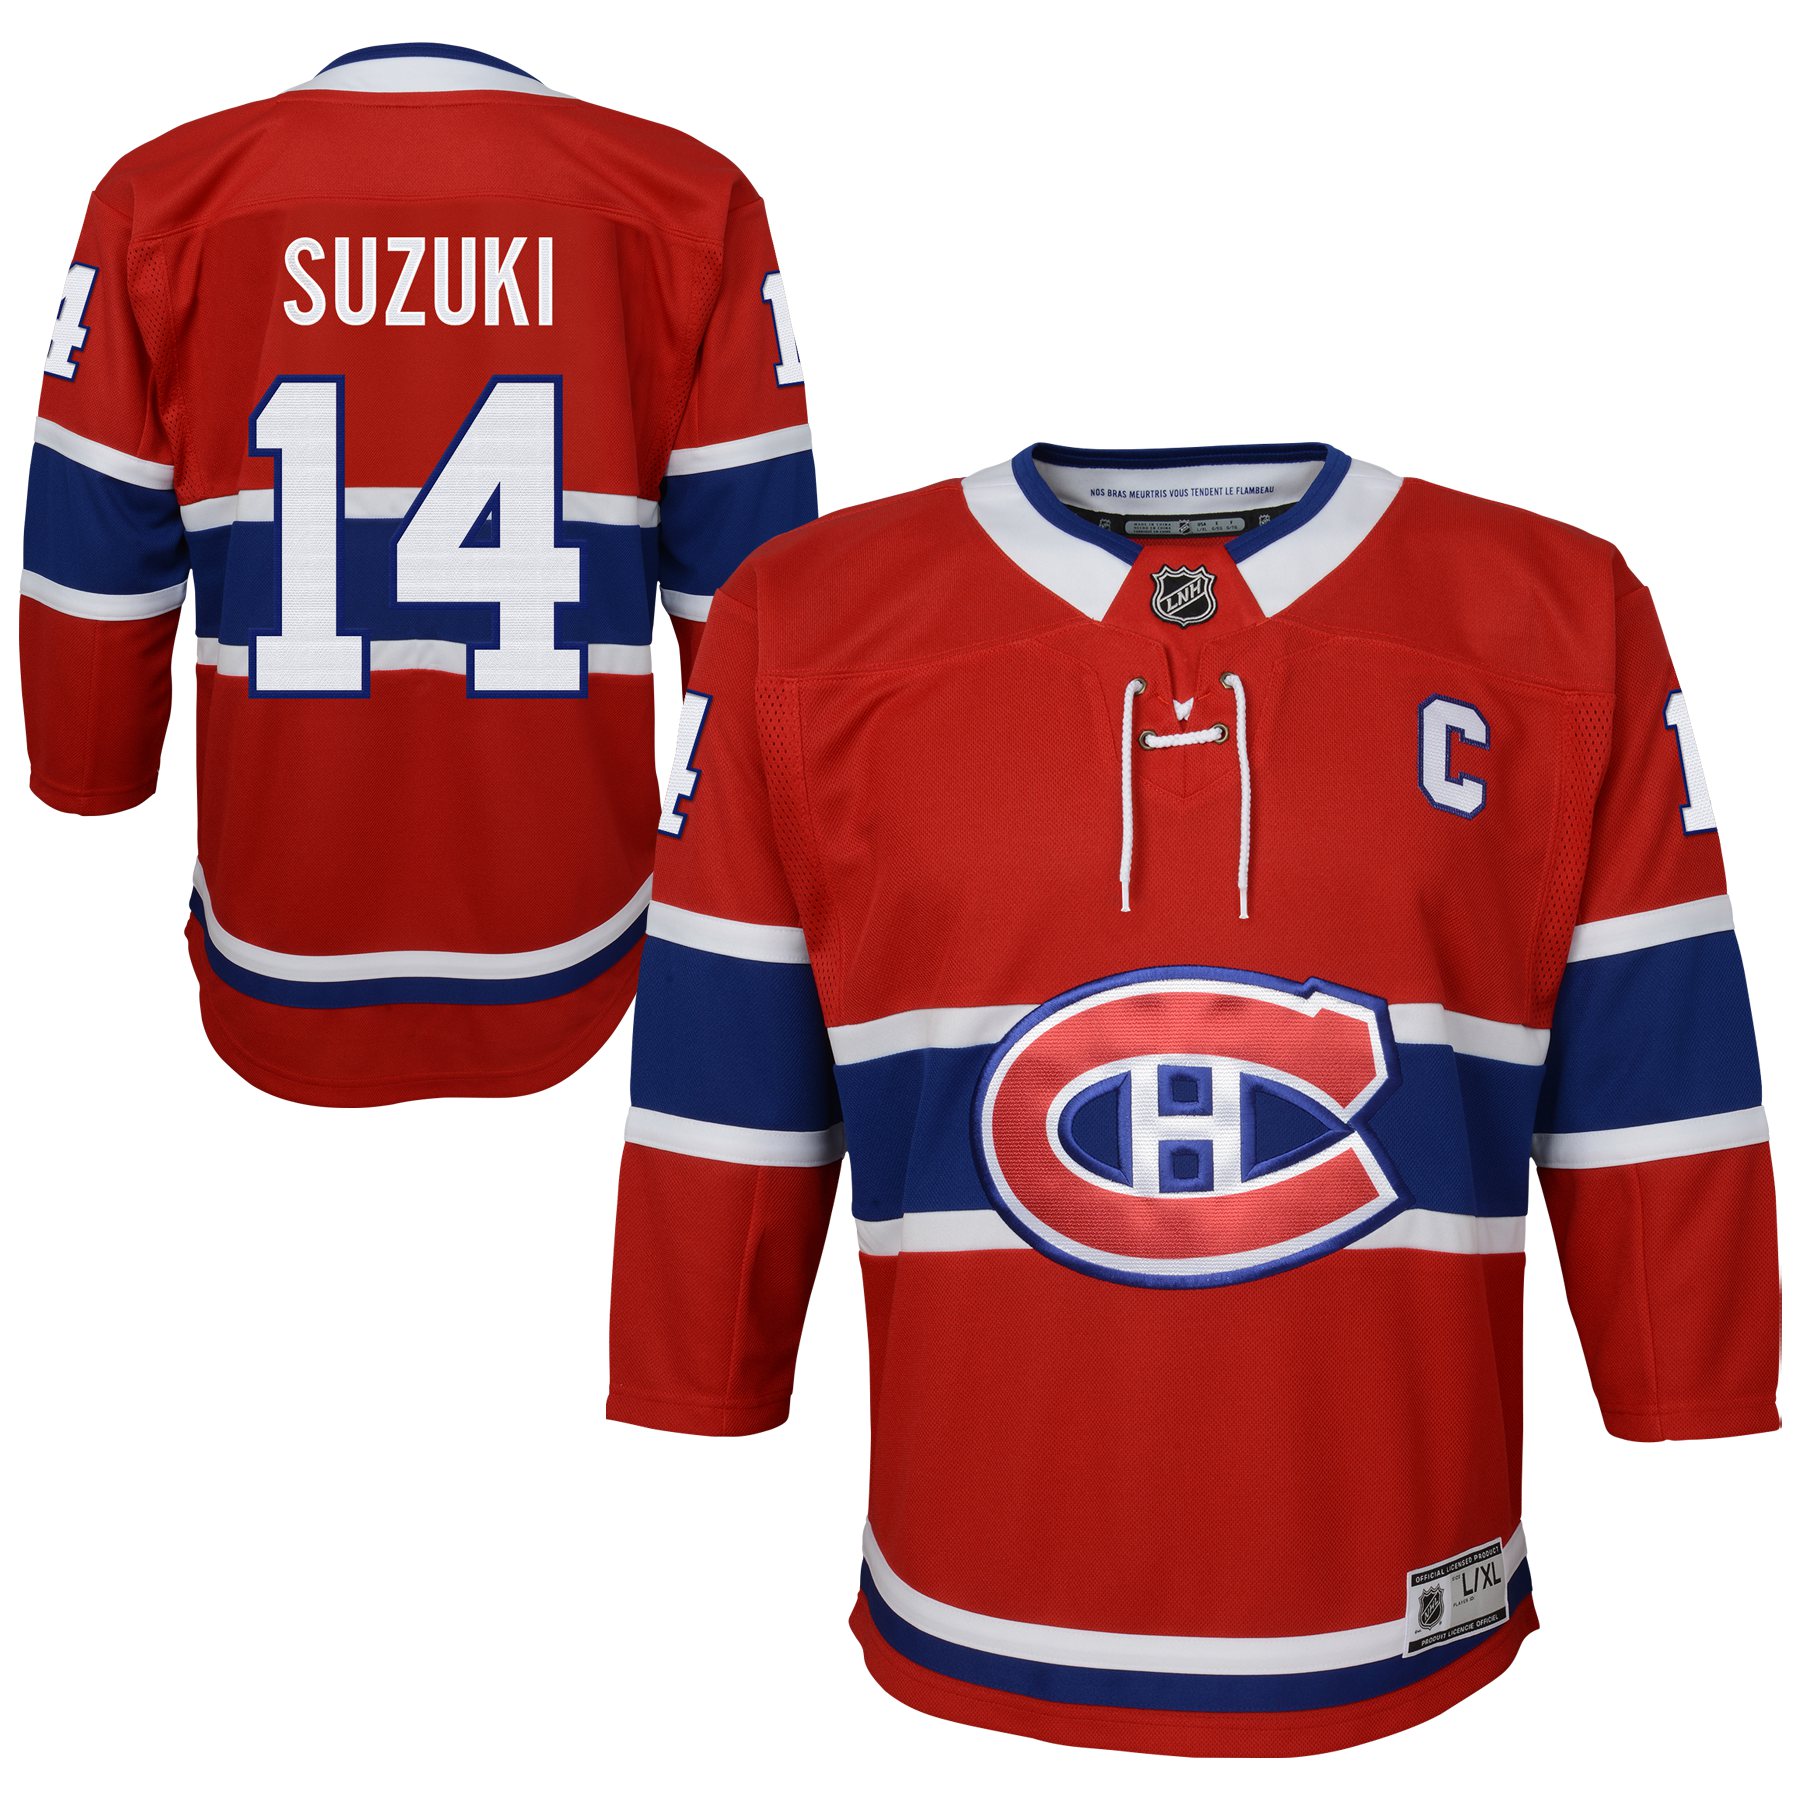 Youth NHL Montreal Canadiens #14 Nick Suzuki Home Red